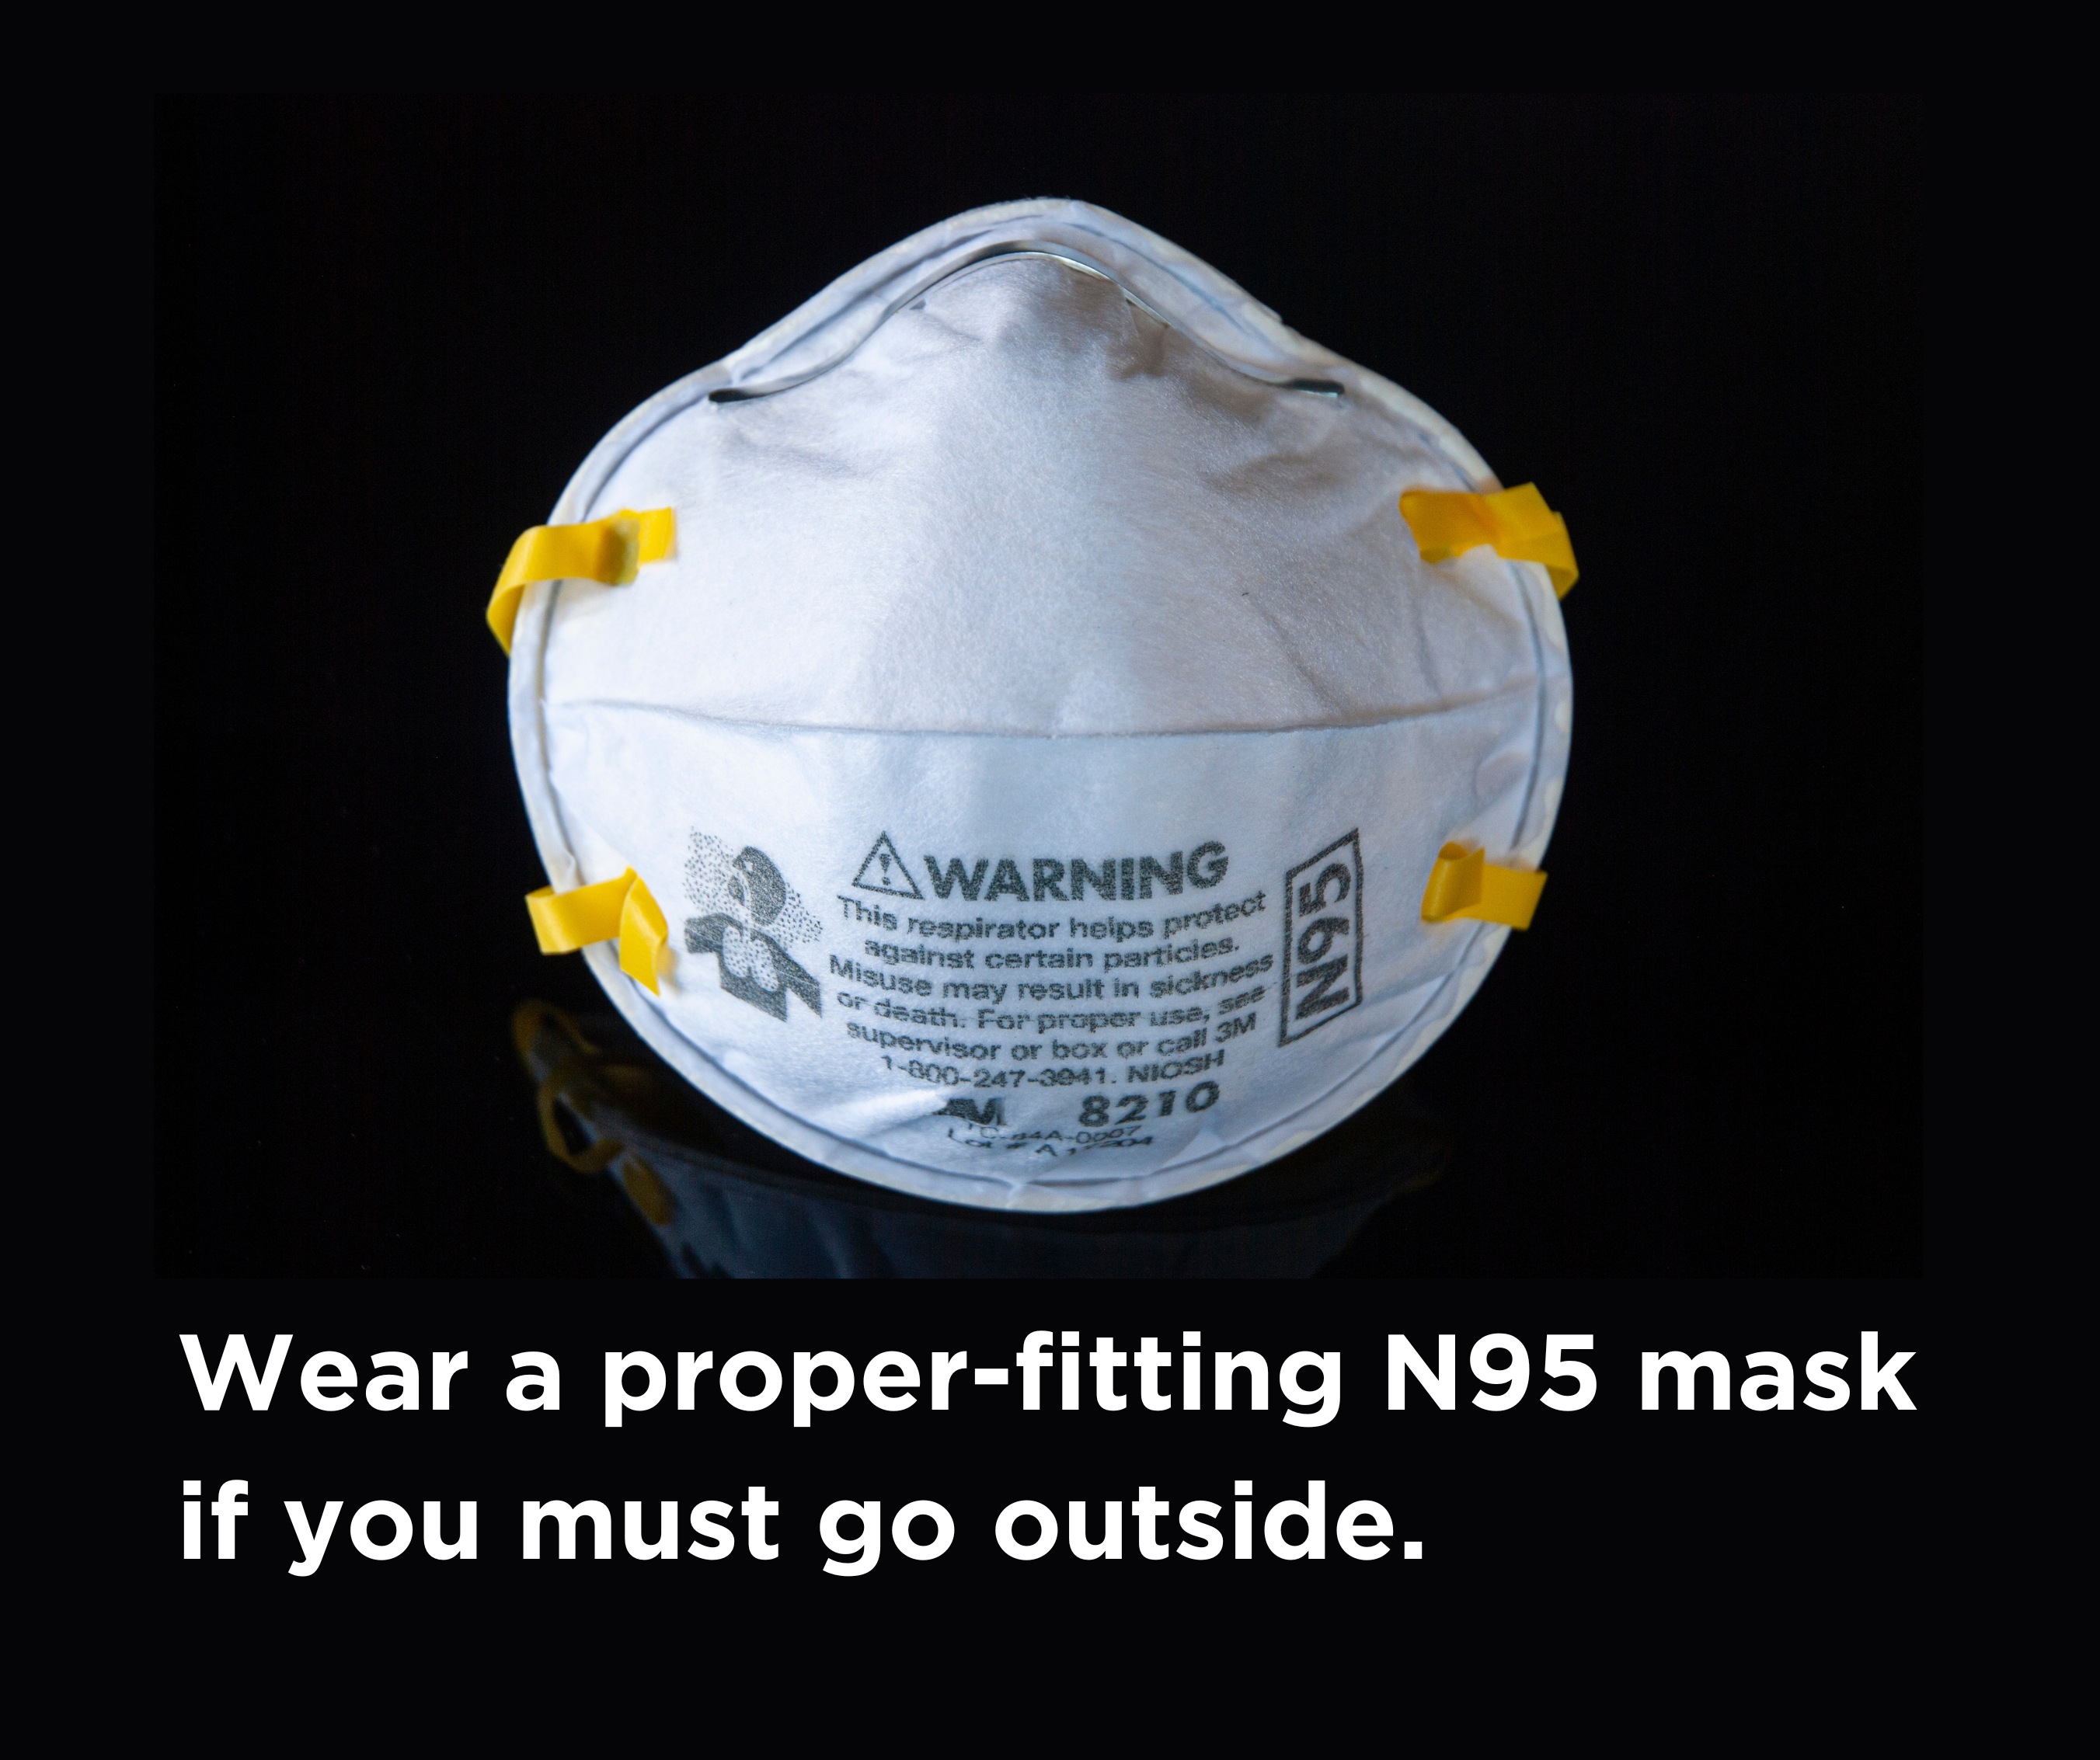 Closeup of N95 respirator mask with caption "Wear a proper-fitting N95 mask if you must go outdoors.".